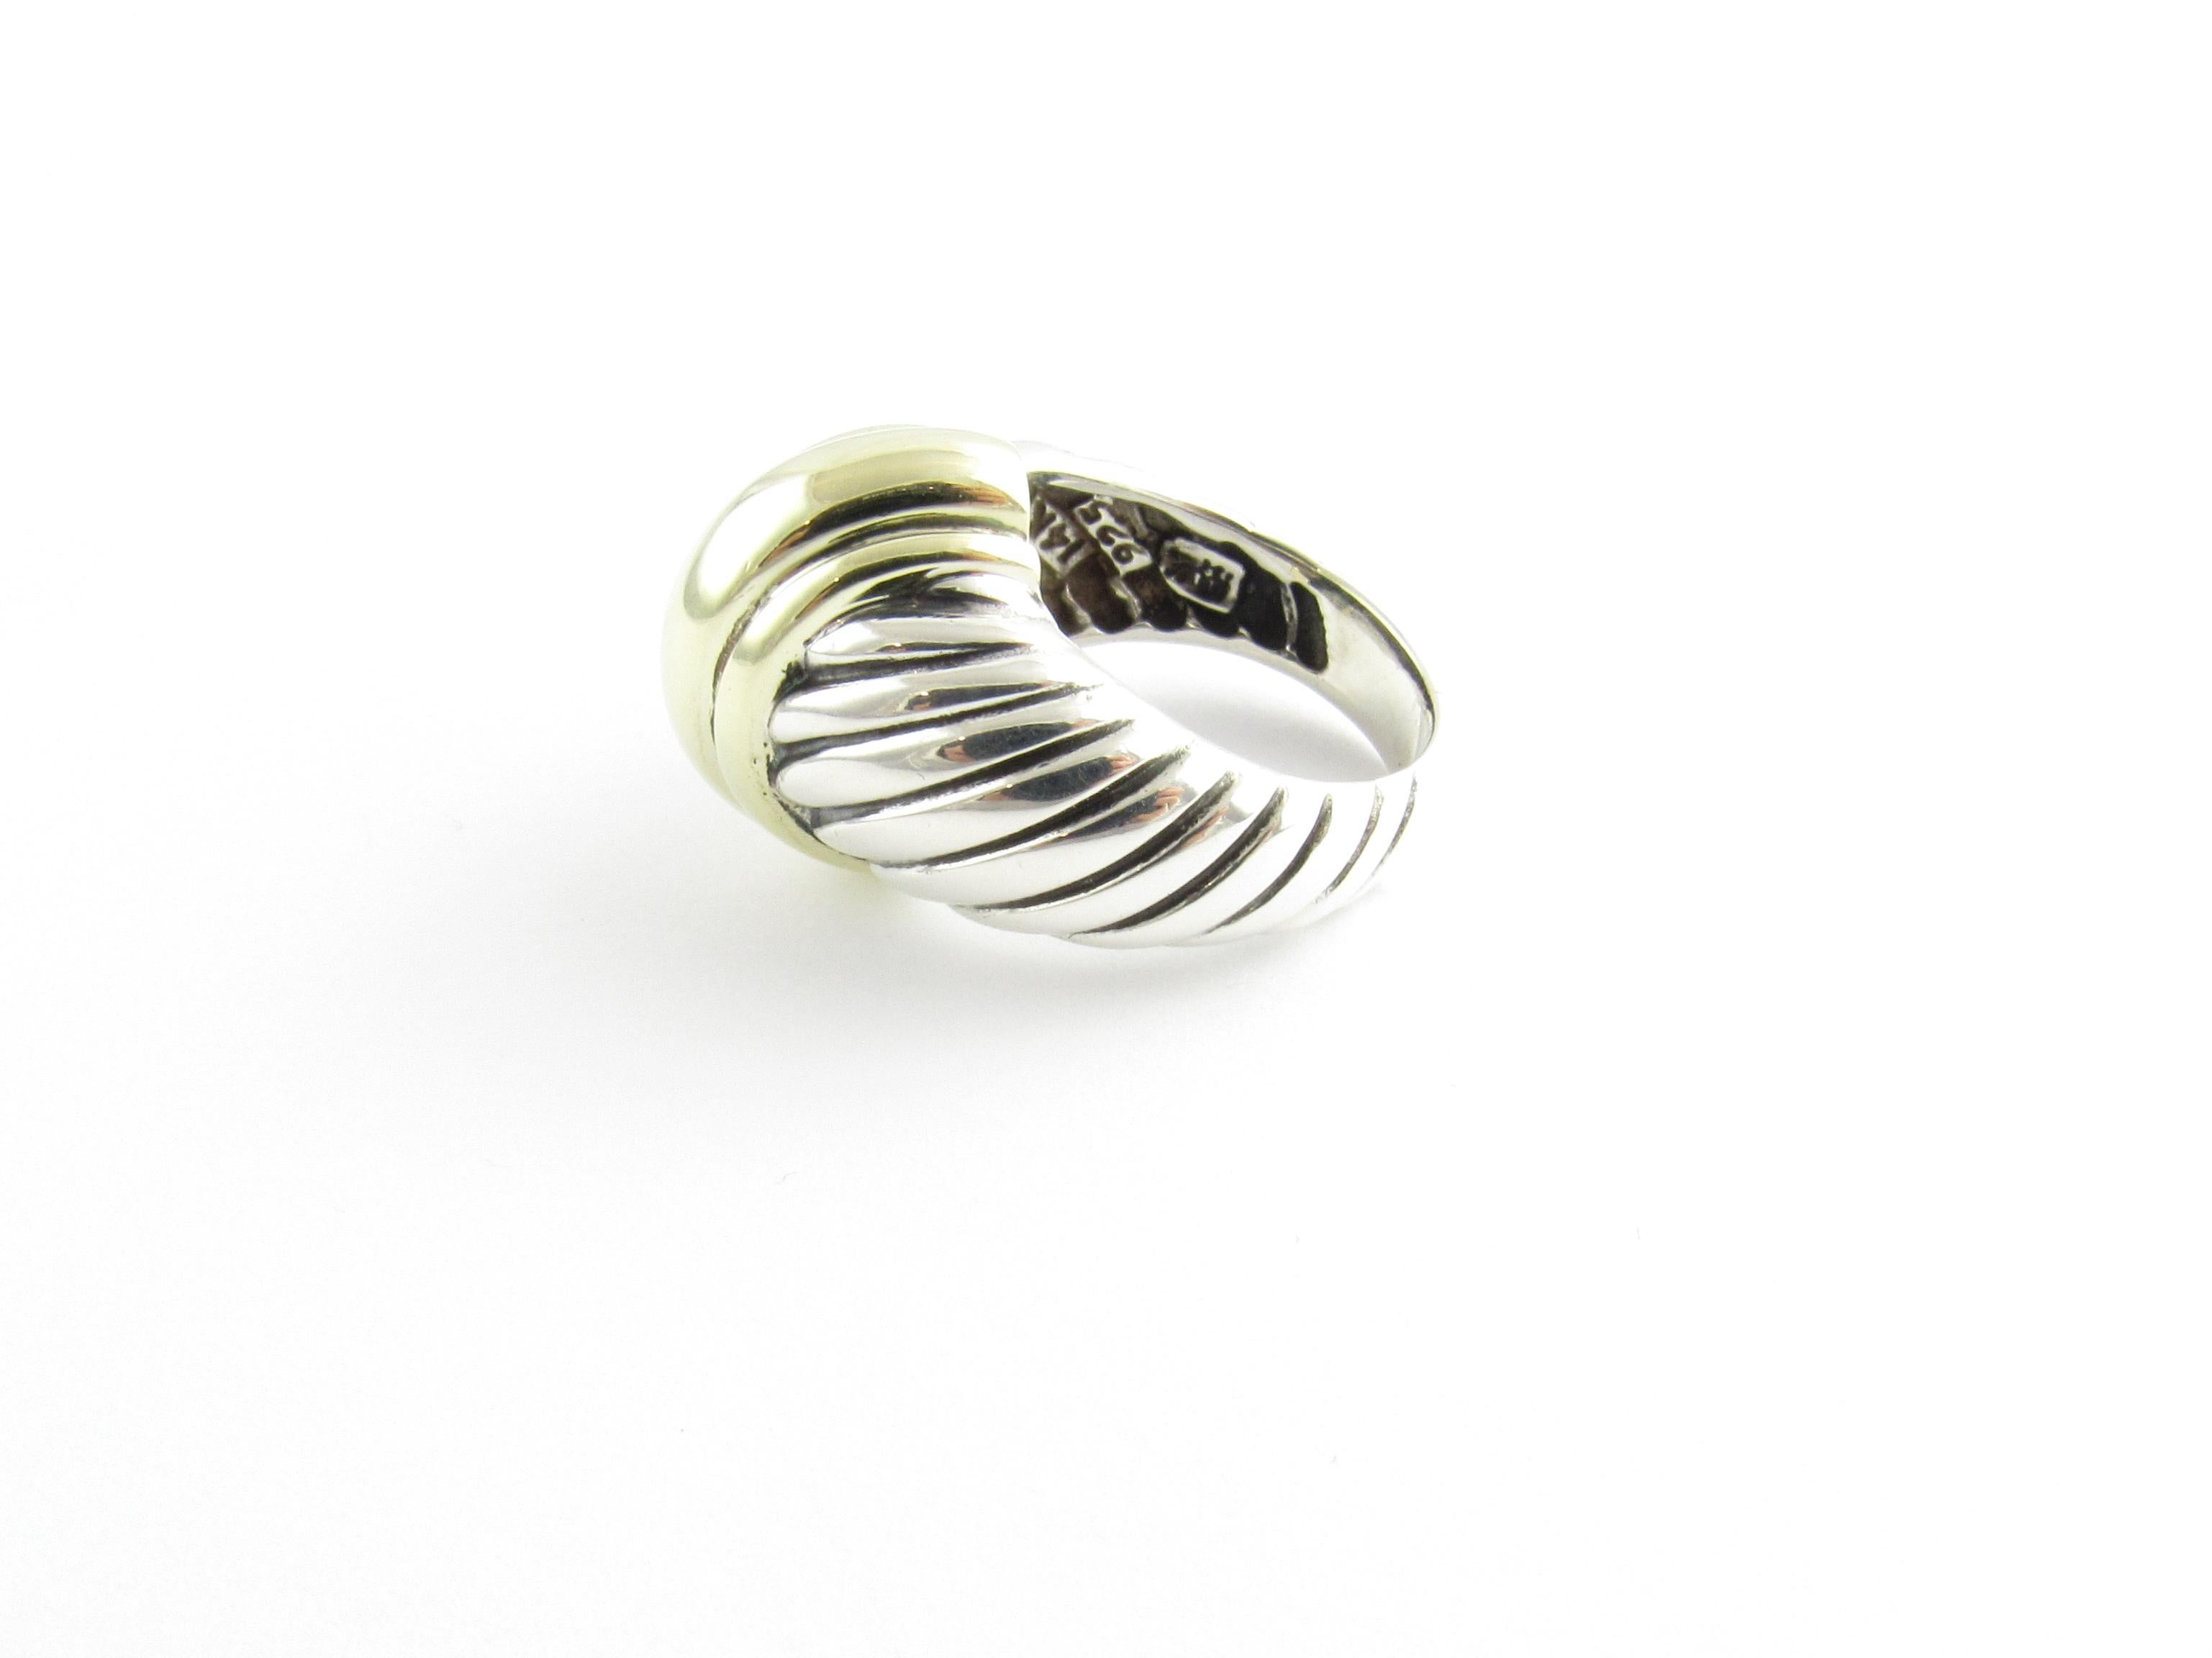 David Yurman Sterling Silver 14K Yellow Gold Shrimp Dome Ring

This authentic David Yurman dome ring is a size 4.5

The ring is approx. 15mm wide in the front and 4mm wide in the back

Stamped 925 14K Yurman

6.5 g / 4.1 dwt

Very good pre owned